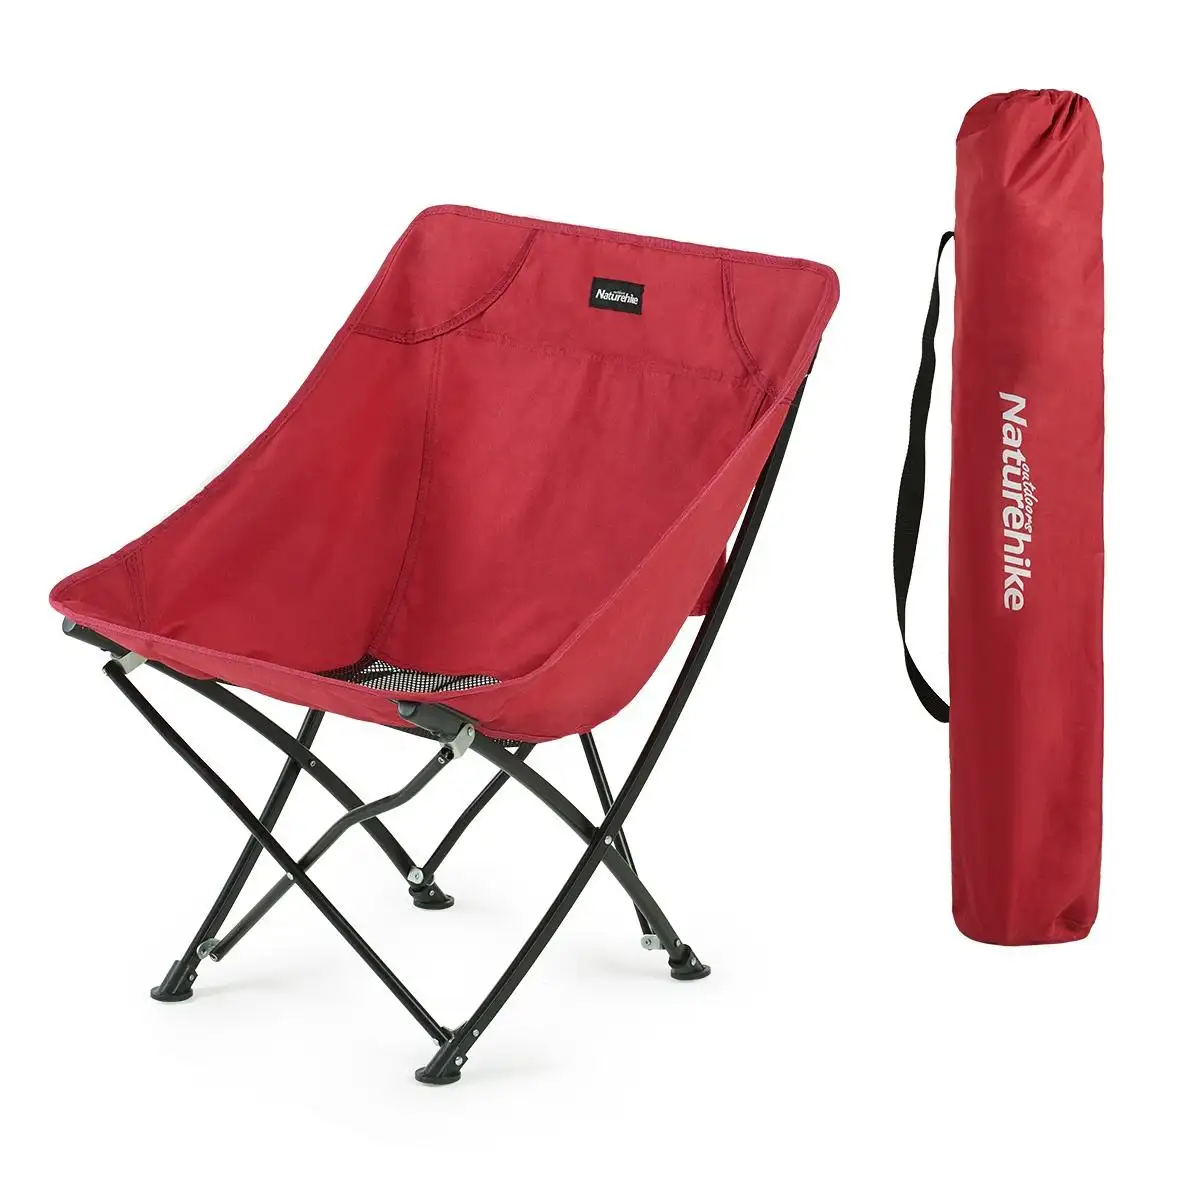 AI-MICH Outdoor Stainless Steel Beach Chair Portable Folding Lounge Beach Camping Chair with Removable Headrest Wood Beach Chair